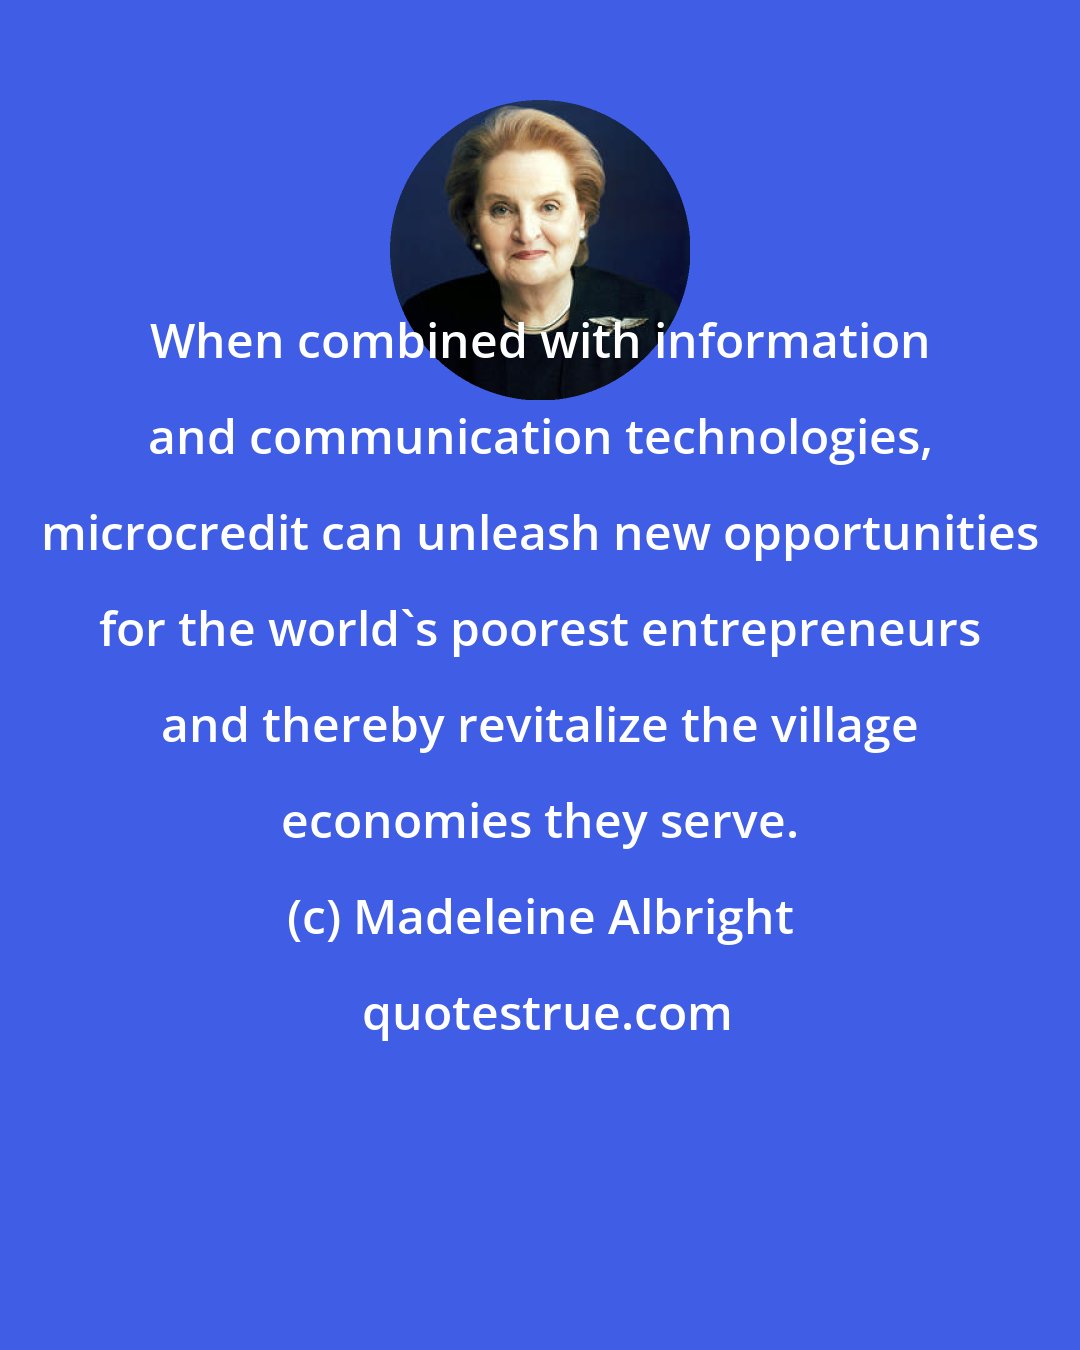 Madeleine Albright: When combined with information and communication technologies, microcredit can unleash new opportunities for the world's poorest entrepreneurs and thereby revitalize the village economies they serve.